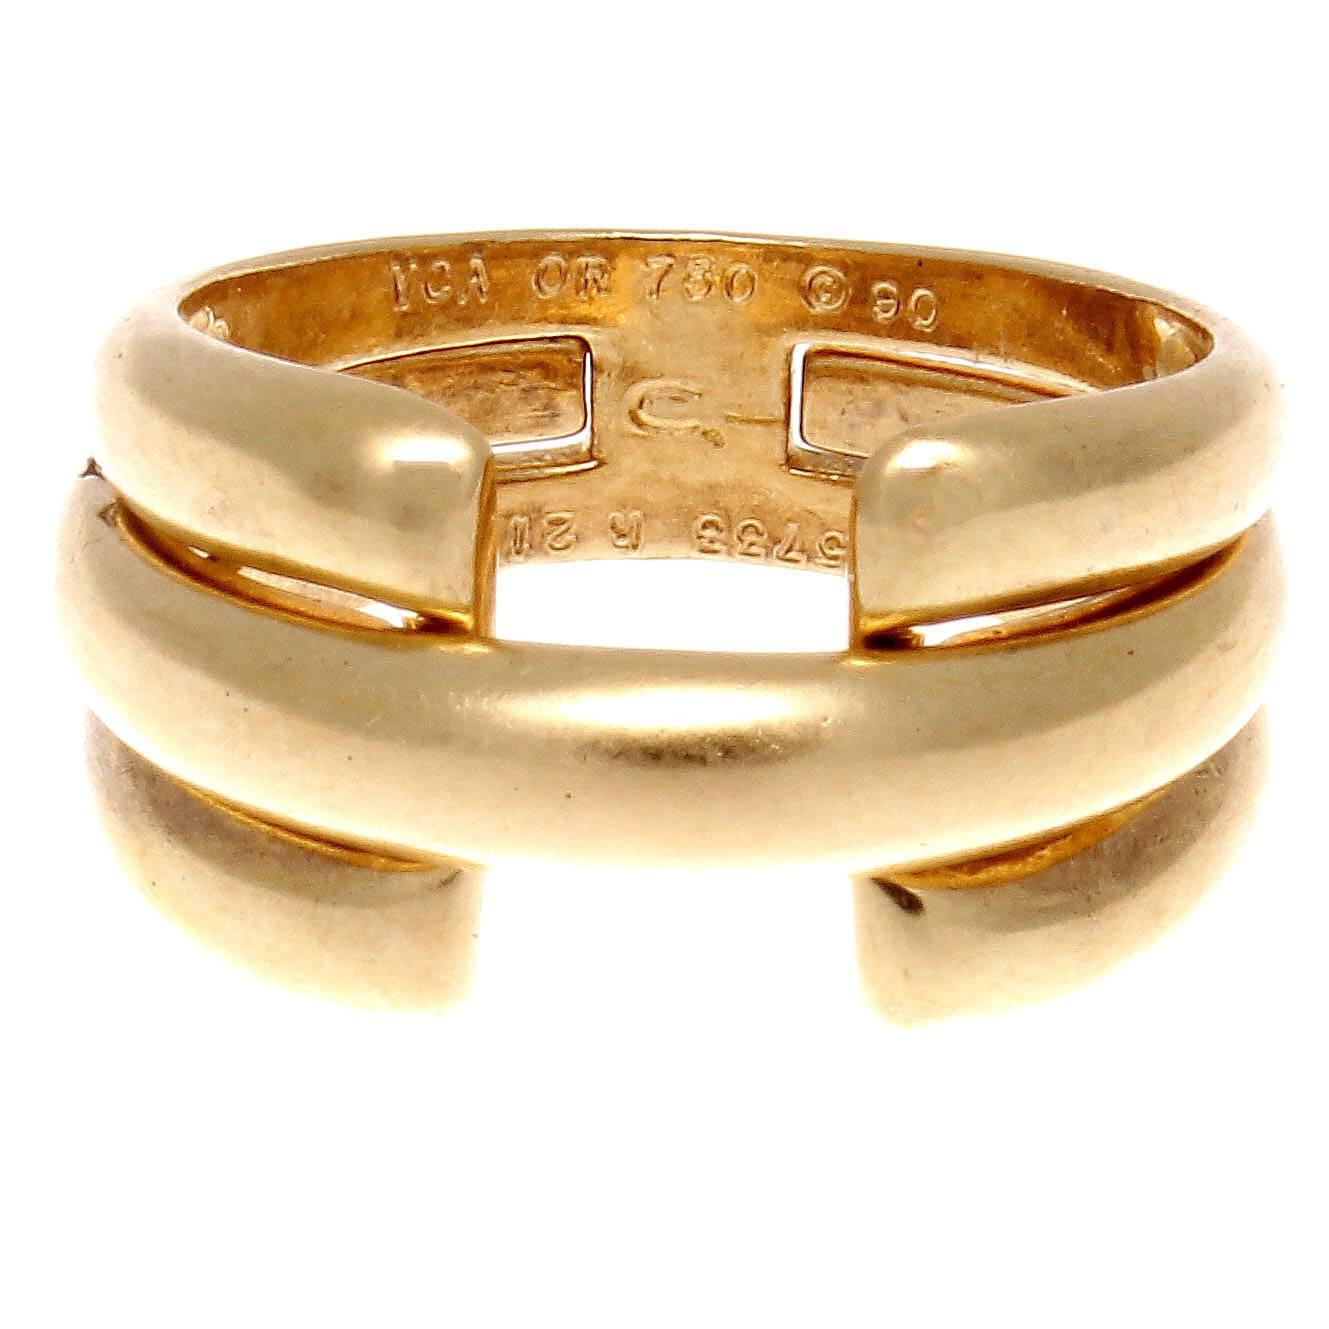 Sophisticated modern design from one of the pillars of jewelry making, Van Cleef & Arpels. Seamlessly creating two rings that become one. Crafted in glistening 18k yellow gold. Signed VCA, numbered and stamped with French hallmarks

Ring size 6-1/4.